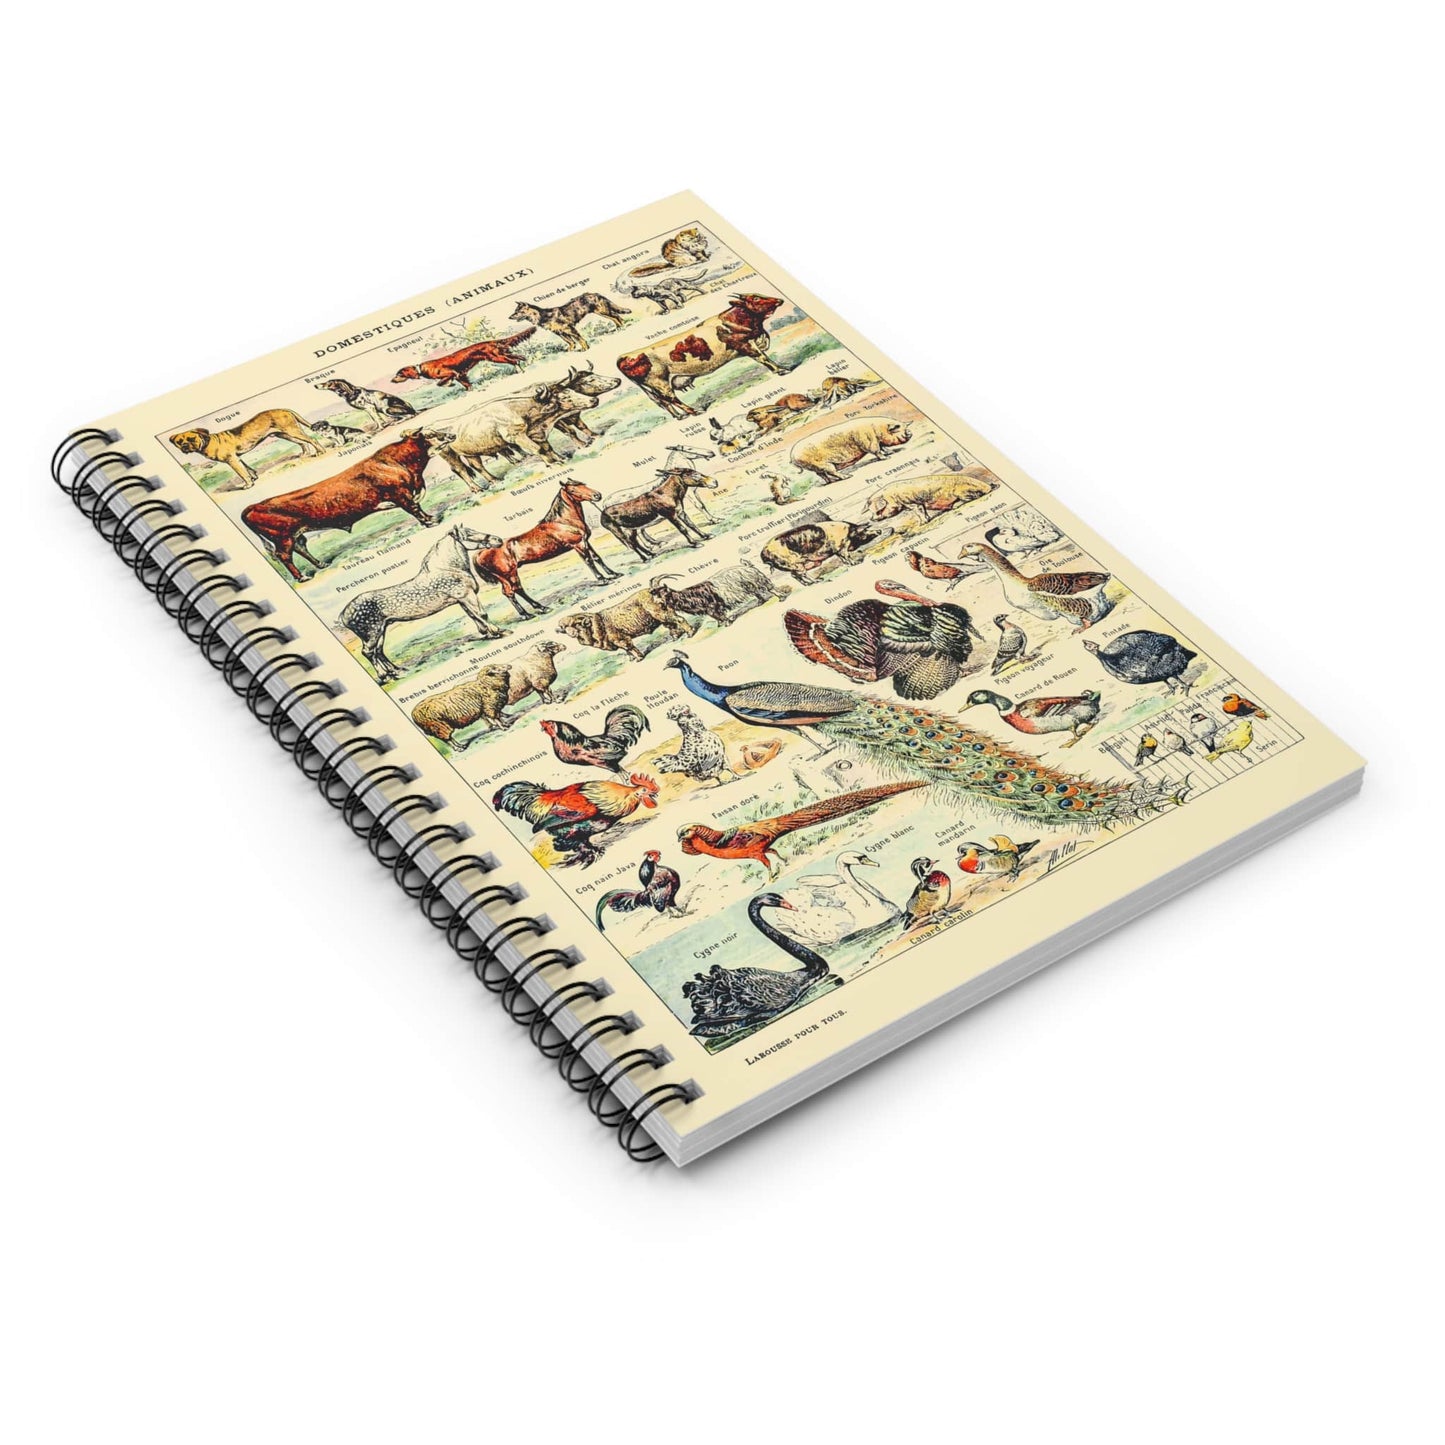 Farm Animals Spiral Notebook Laying Flat on White Surface